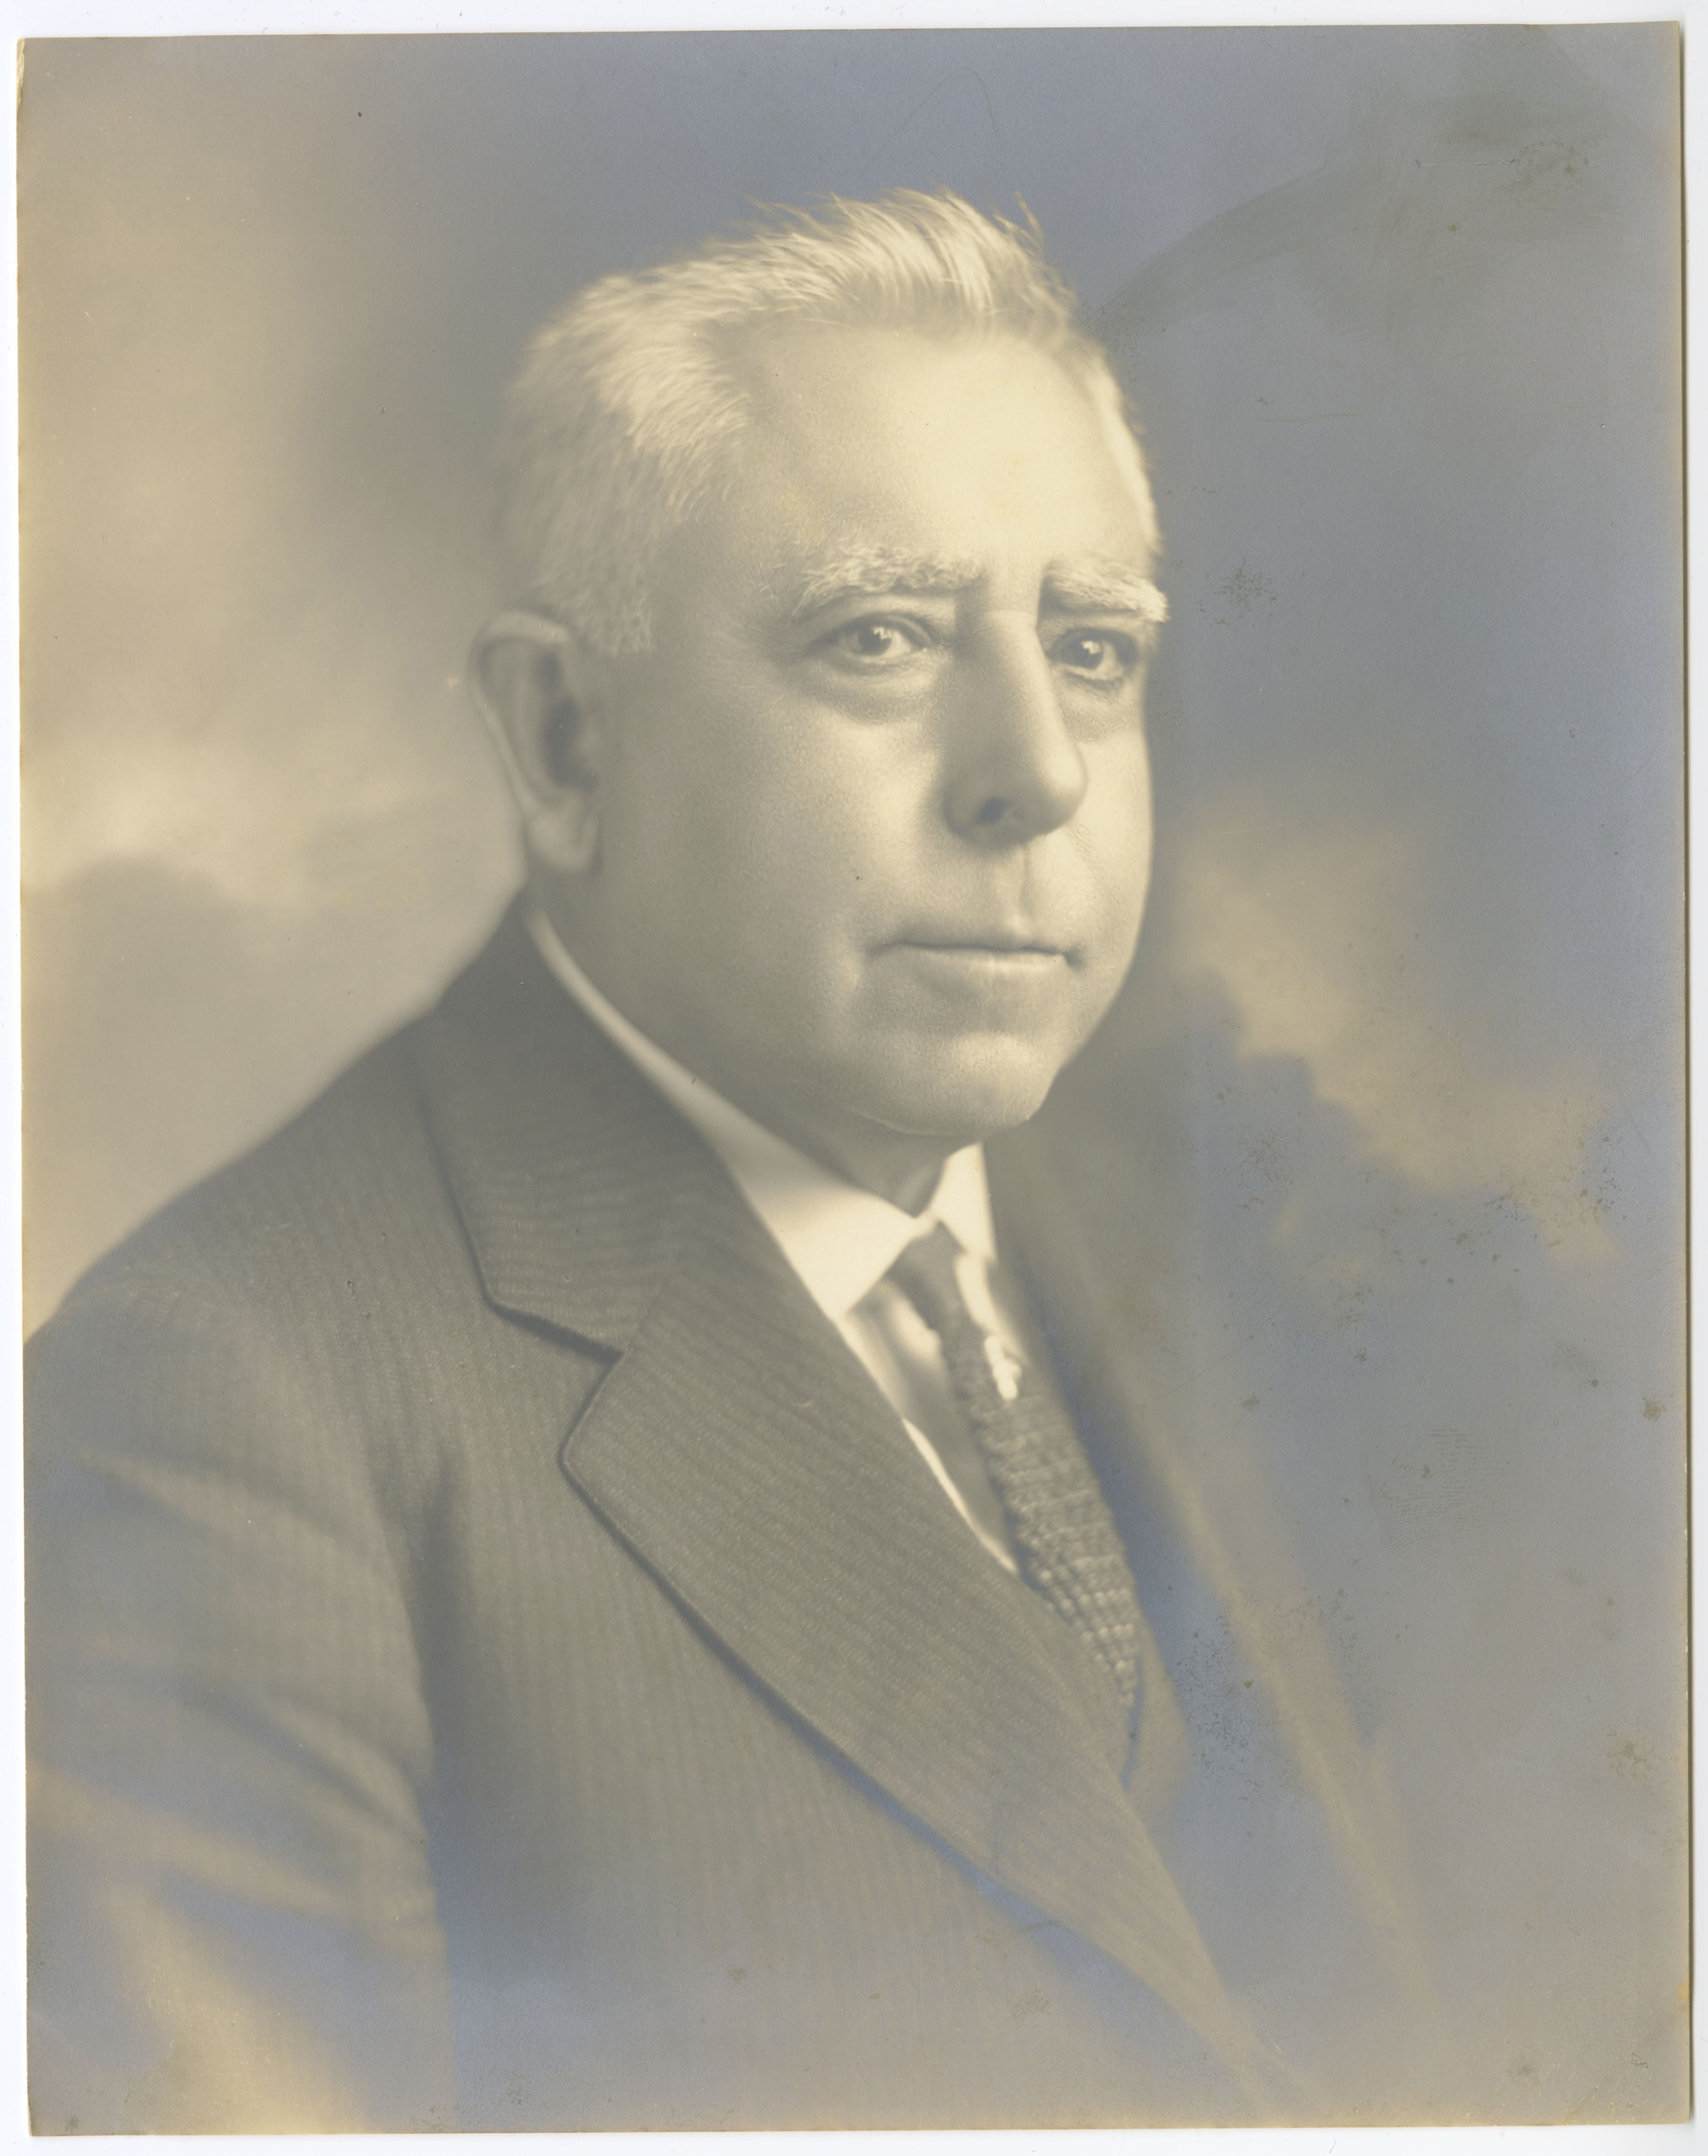 Vintage black-and-white portrait of a white haired man in a suit and tie